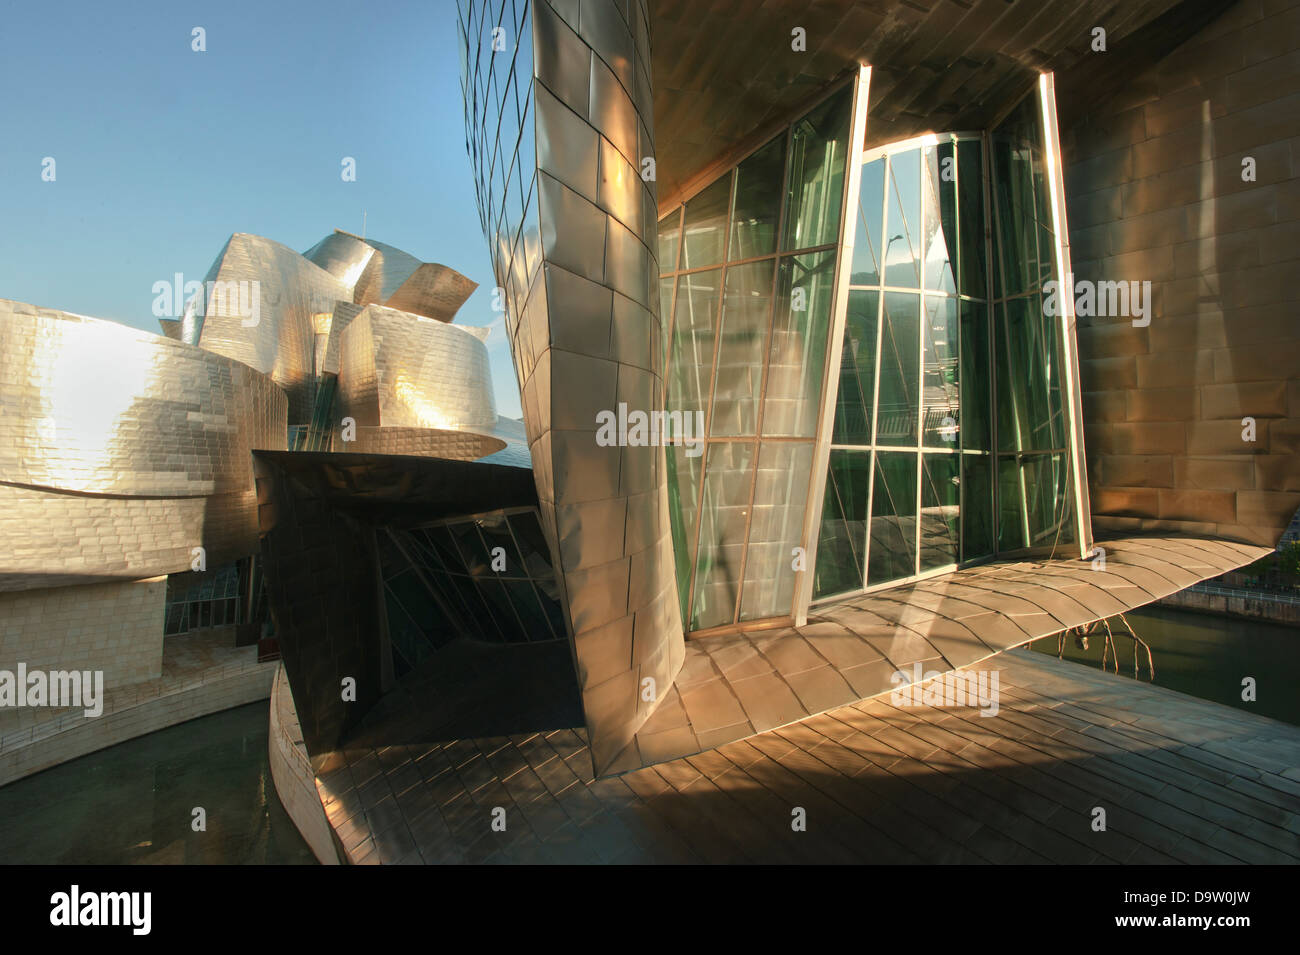 Museo Guggenheim, Bilbao, Spagna, Architetto : Frank Gehry Foto Stock